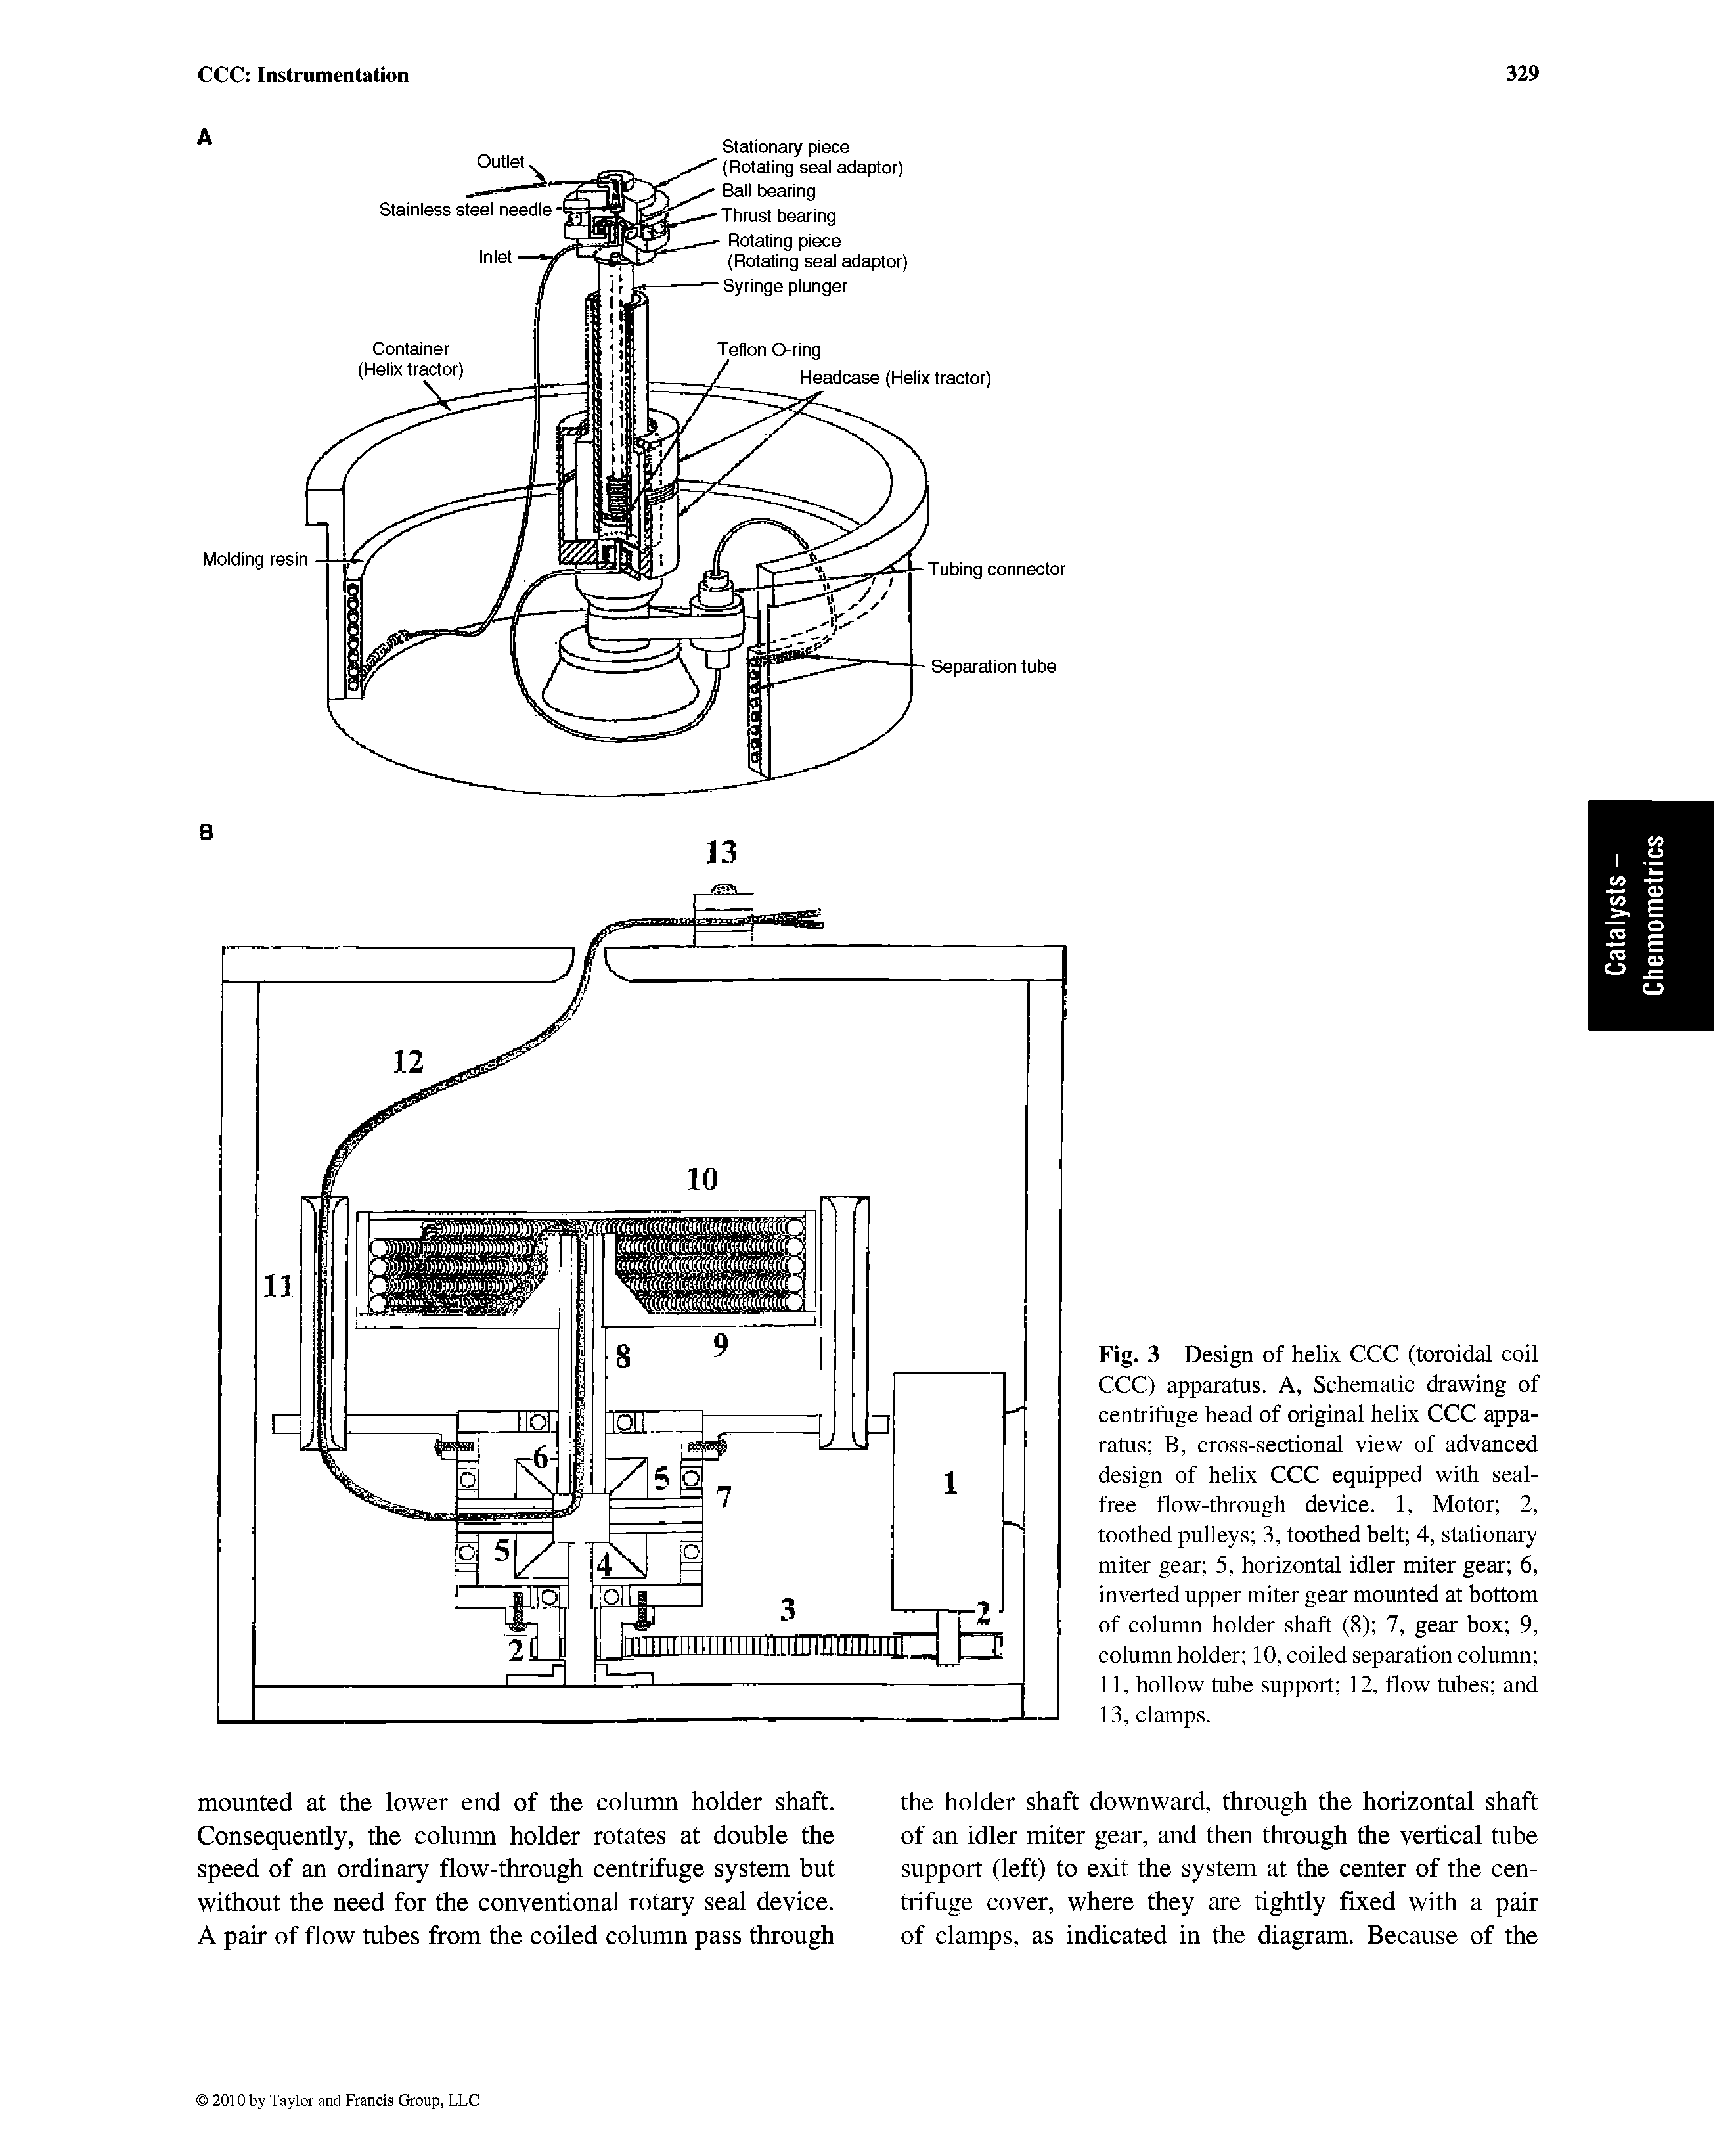 Fig. 3 Design of helix CCC (toroidal coil CCC) apparatus. A, Schematic drawing of centrifuge head of original helix CCC apparatus B, cross-sectional view of advanced design of helix CCC equipped with seal-free flow-through device. 1, Motor 2, toothed pulleys 3, toothed belt 4, stationary miter gear 5, horizontal idler miter gear 6, inverted upper miter gear mounted at bottom of column holder shaft (8) 7, gear box 9, column holder 10, coiled separation column 11, hollow tube support 12, flow tubes and 13, clamps.